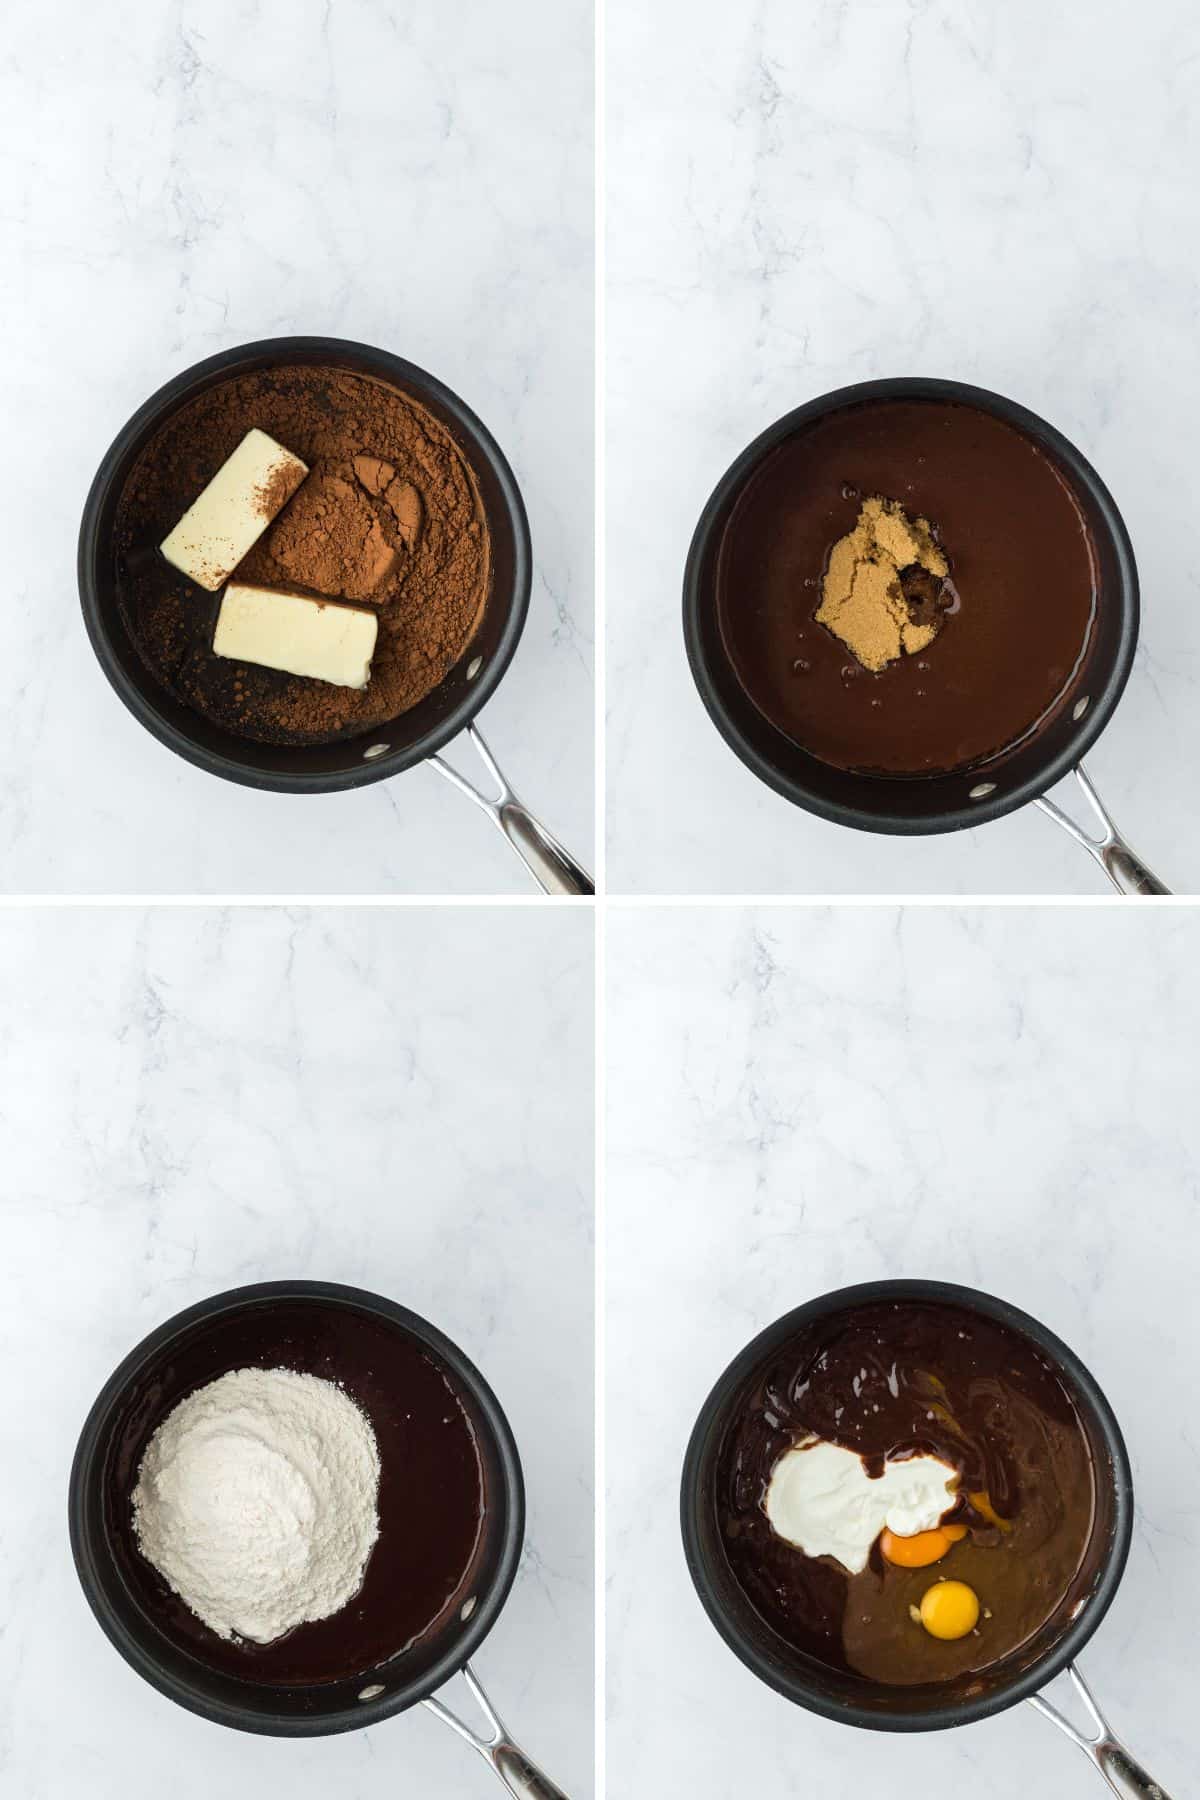 A collage of chocolate sheet cake batter being made on a stove top